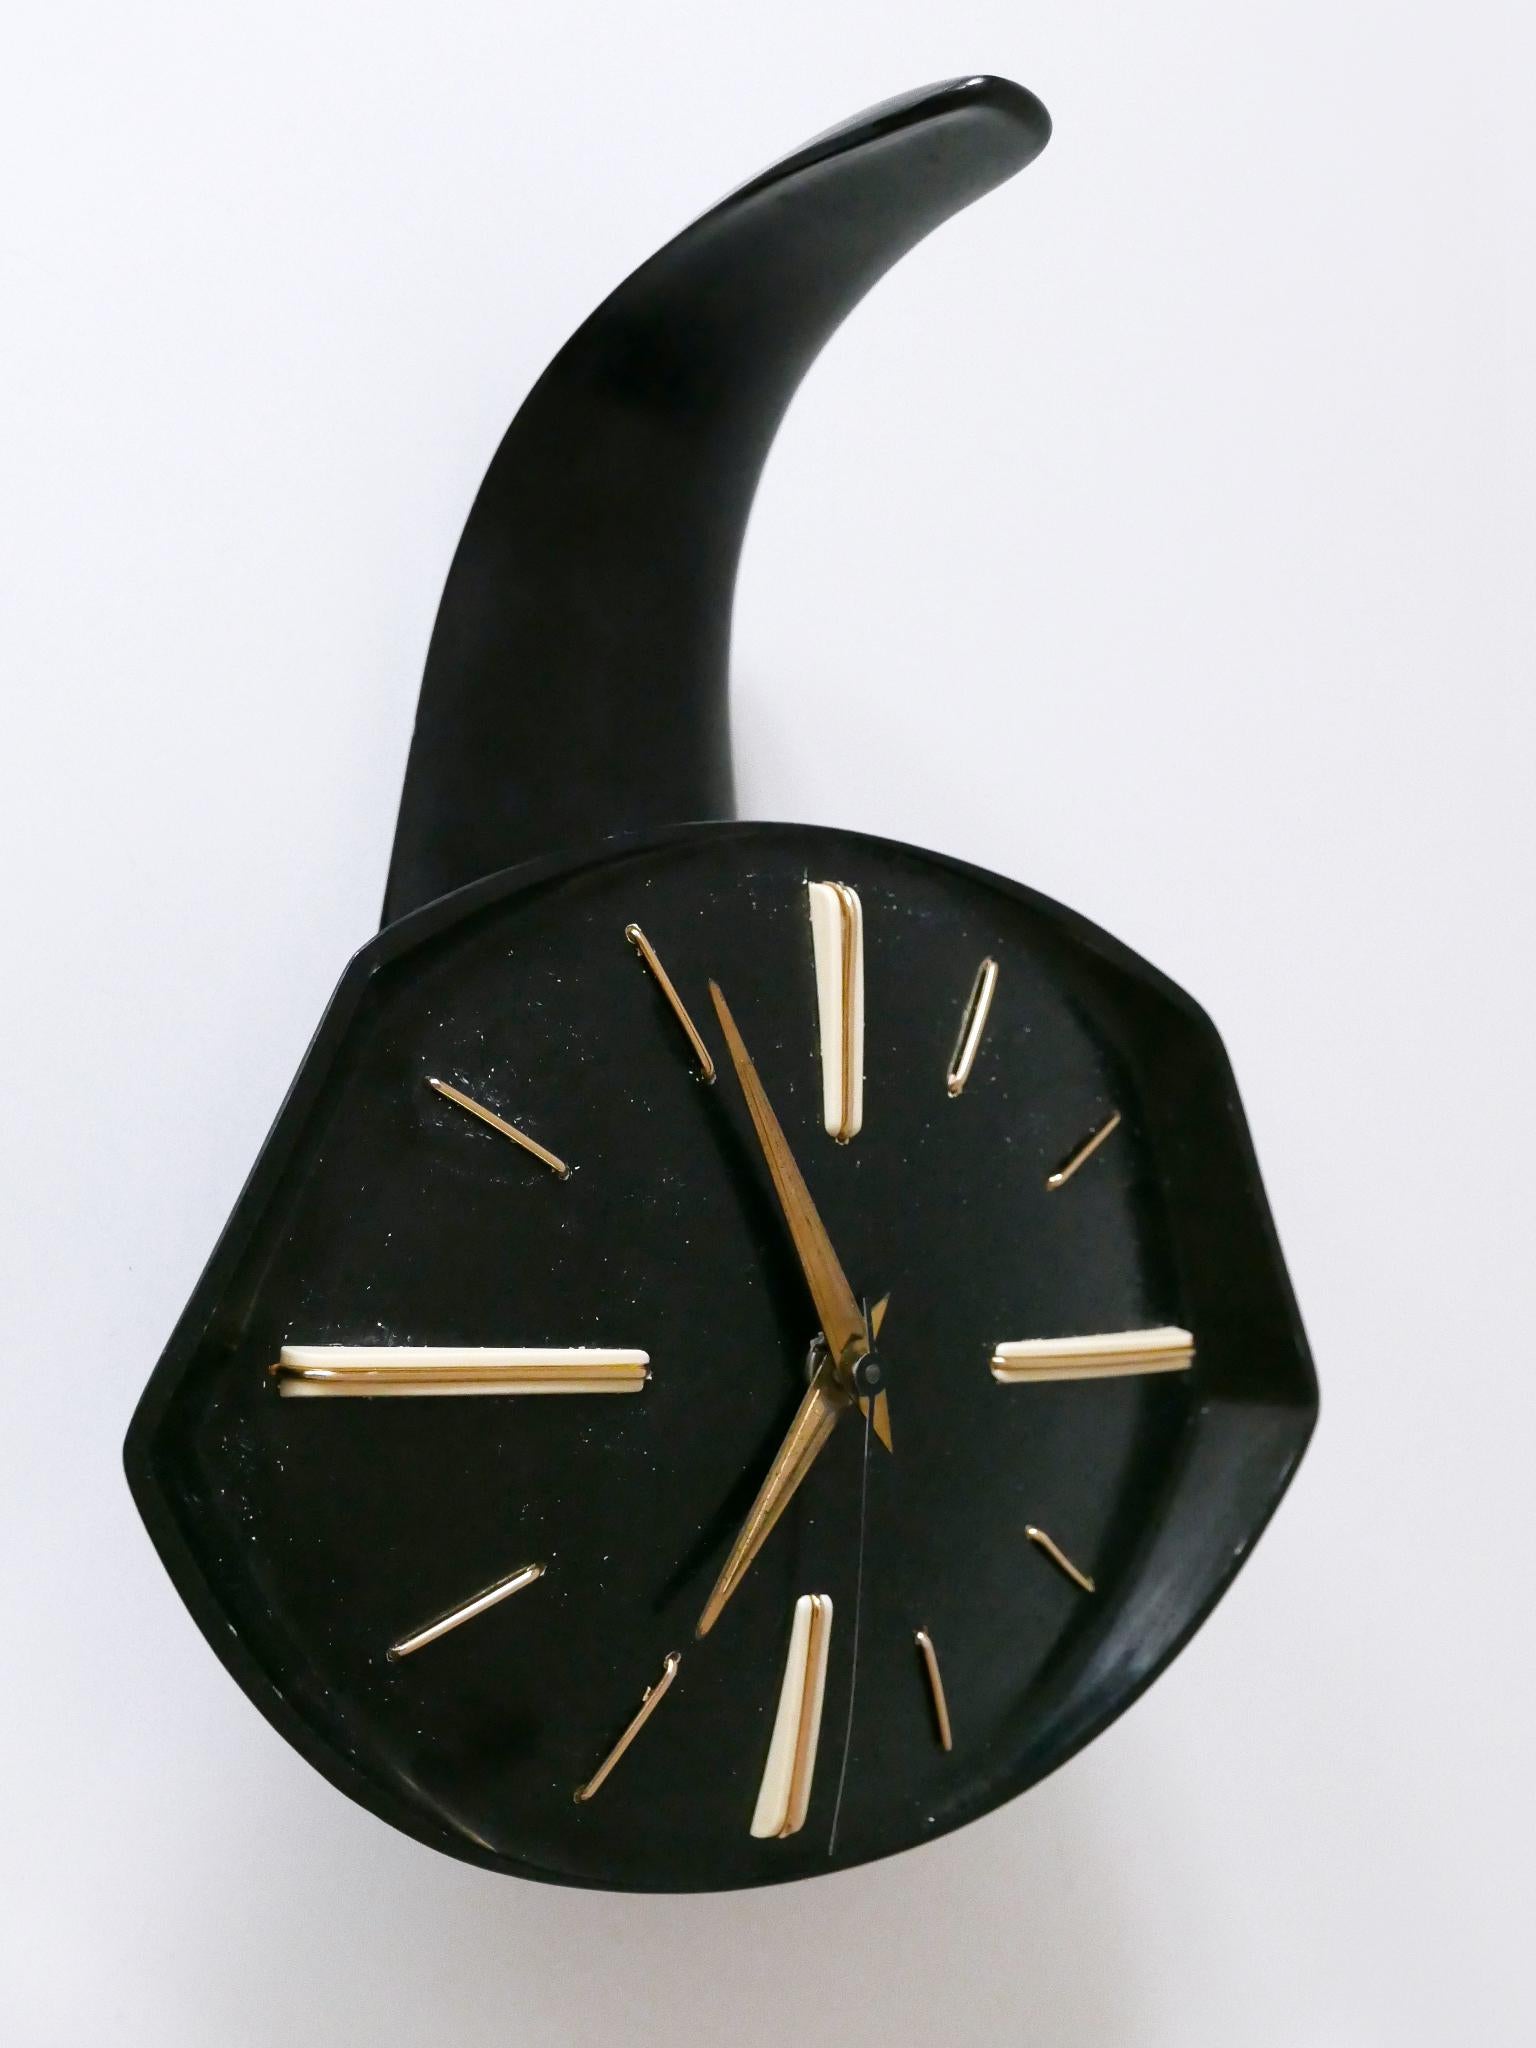 Rare and Lovely Mid-Century Modern Bakelite Table or Wall Clock by PRIM 1950s For Sale 2